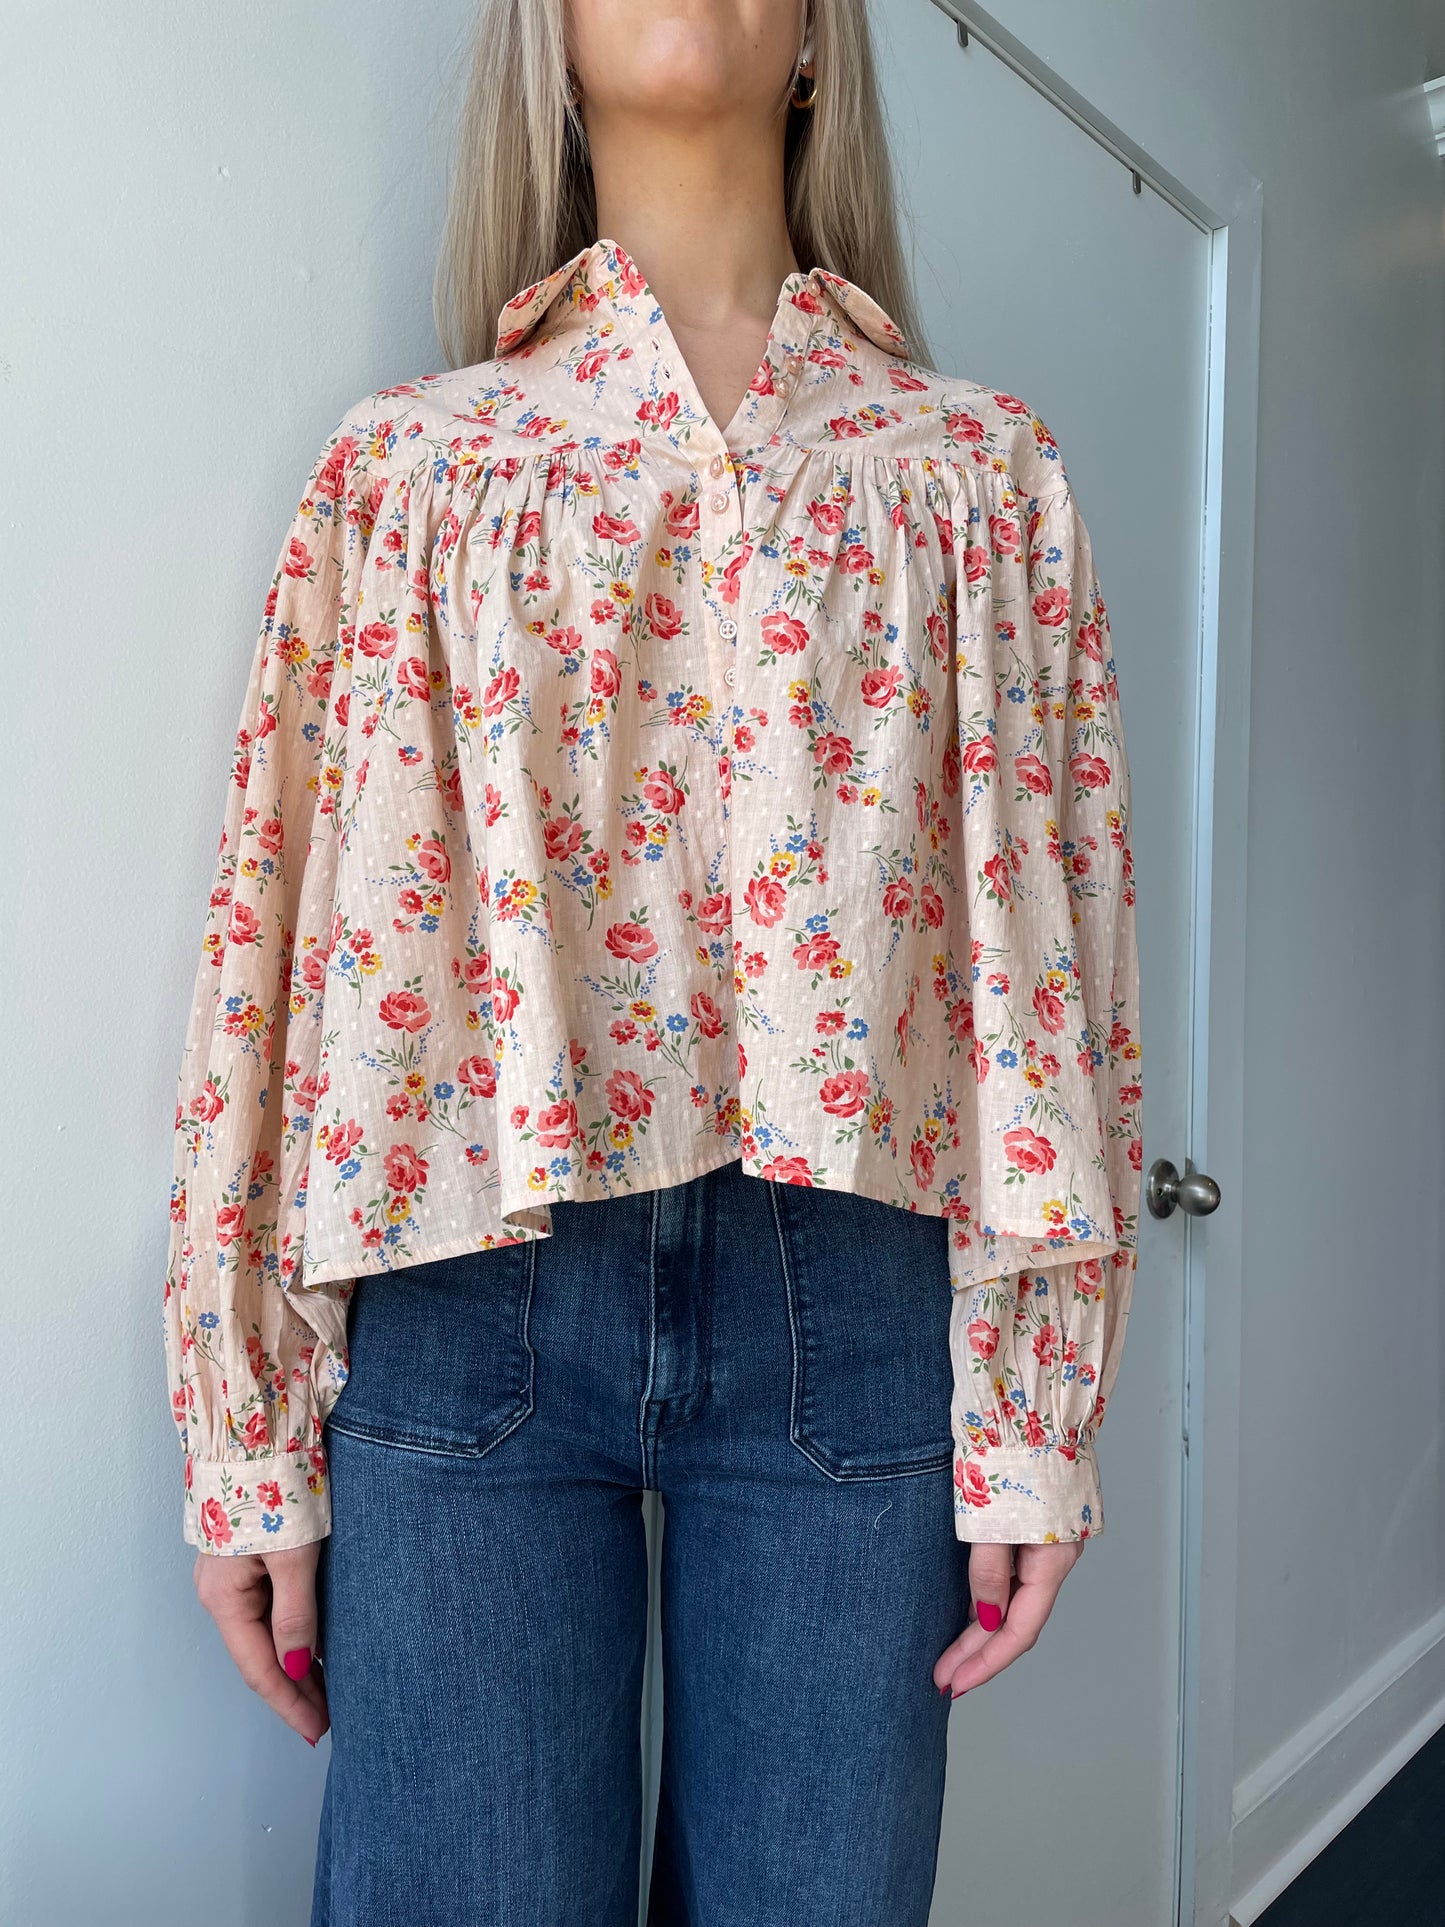 The Great- The Carousel Top- Pale Pink Kerchief Rose Print